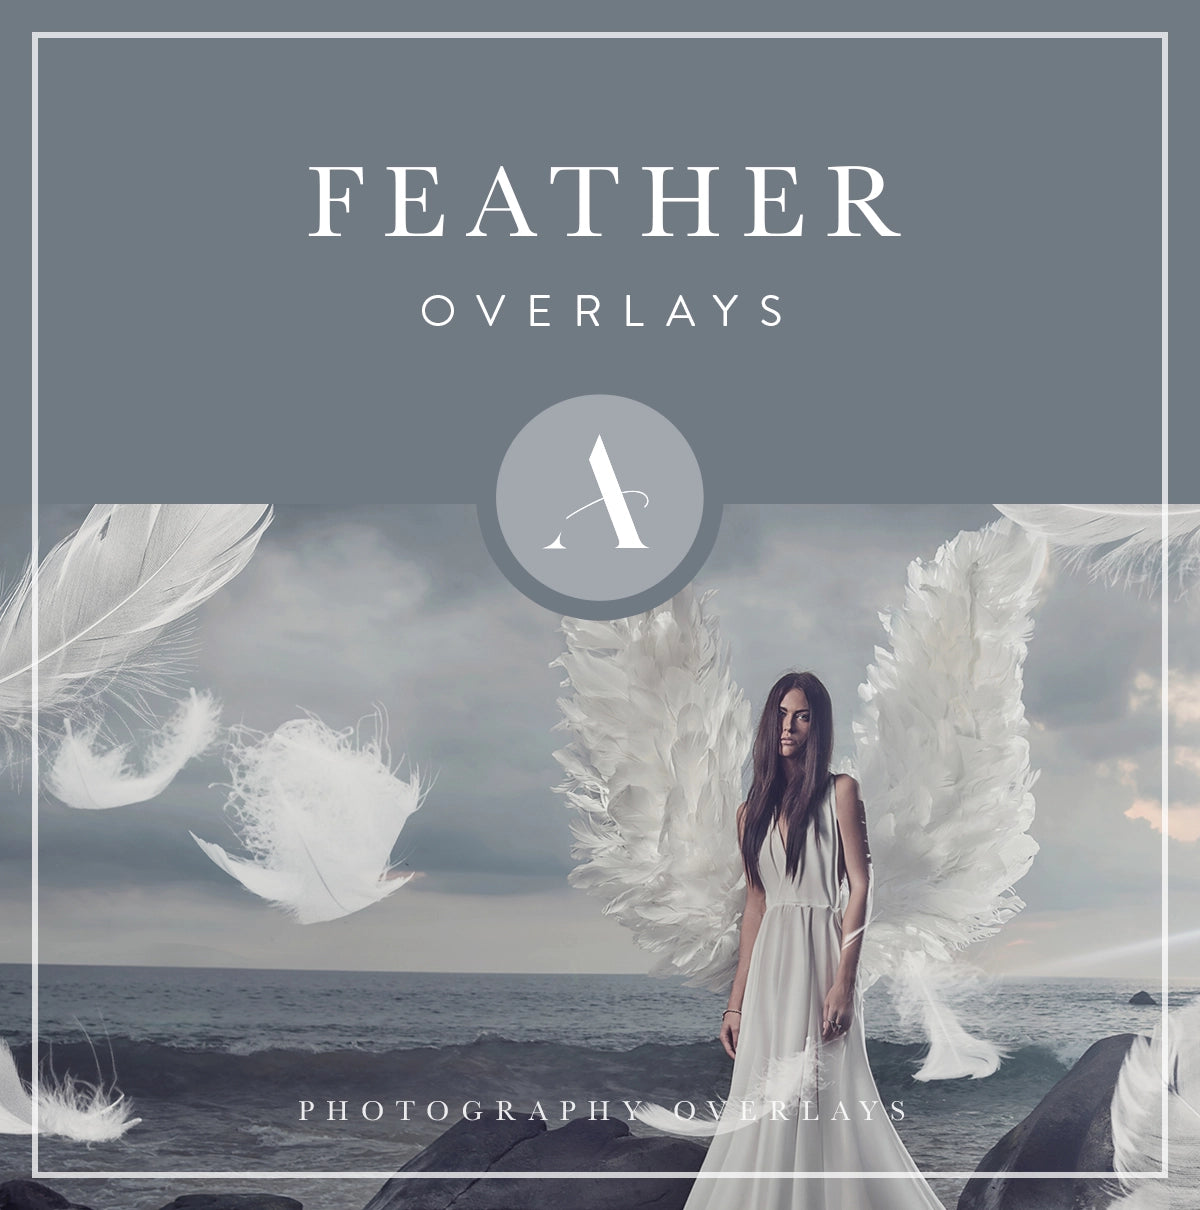 feather overlays for photoshop, photo editing, digital photography and photographers